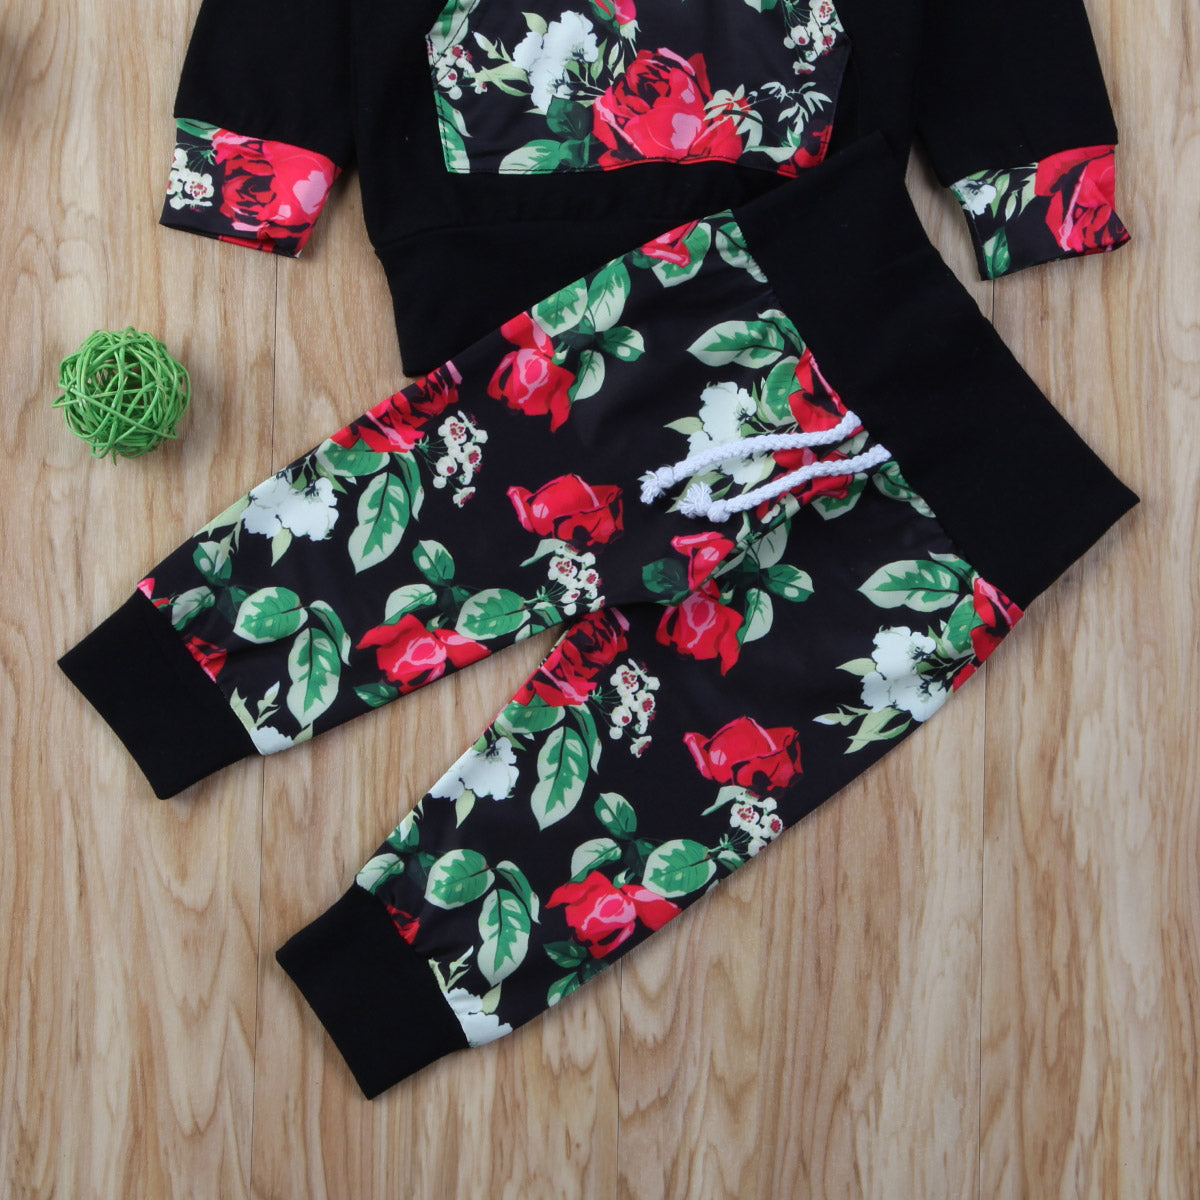 Floral Baby Girls Warm T-shirt Sweatshirt Tops+Pants Outfit Toddler Clothes - ebowsos